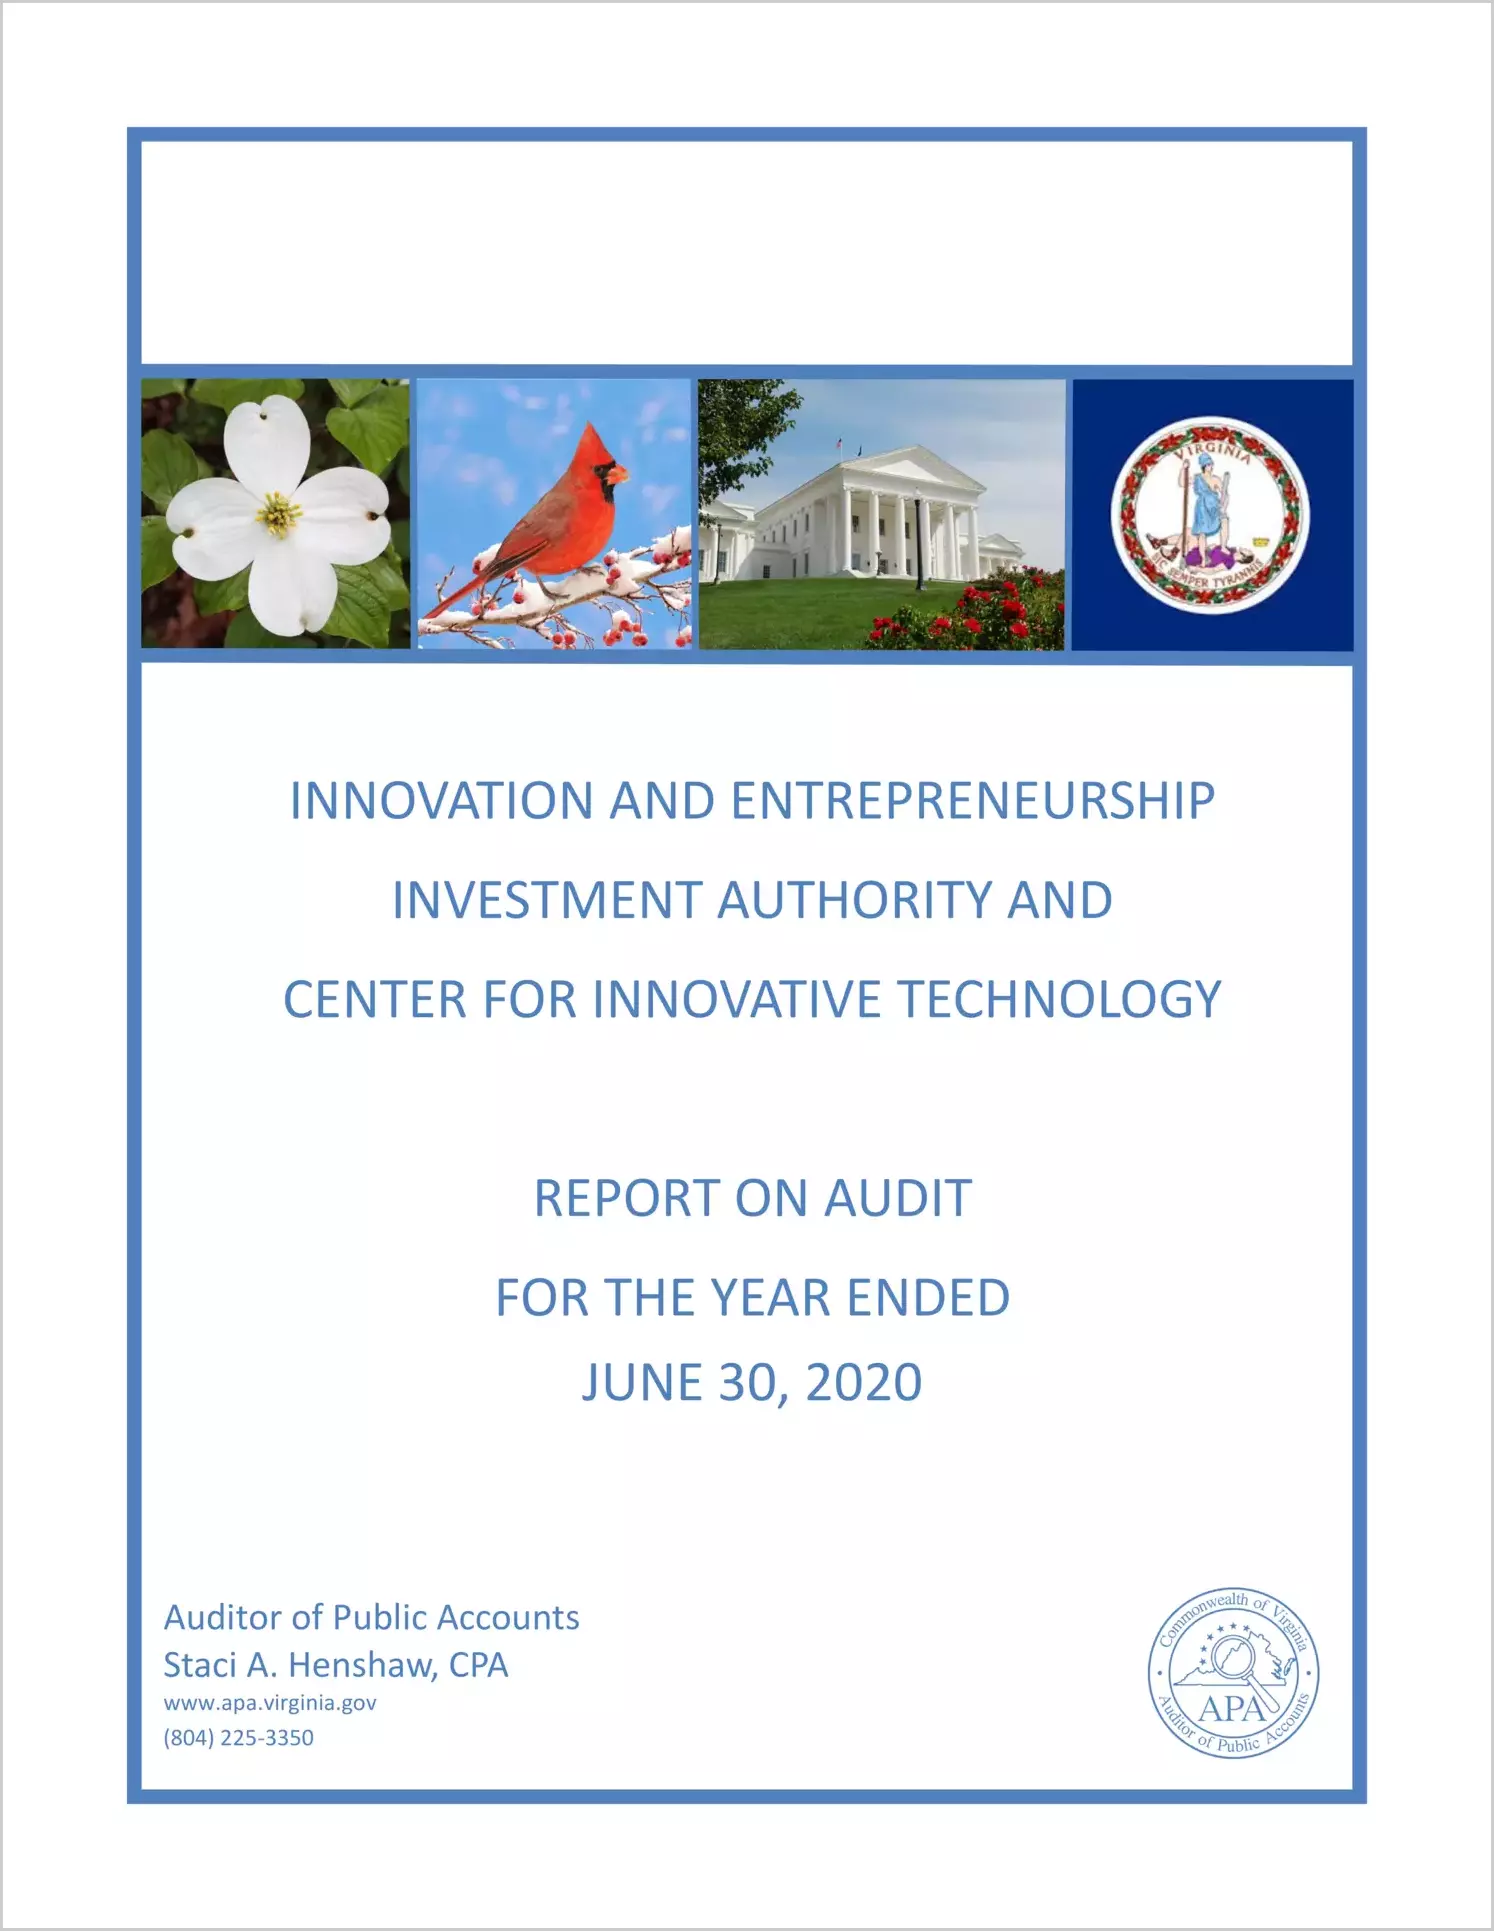 Innovation and Entrepreneurship Investment Authority and Center for Innovative Technology for the year ended June 30, 2020